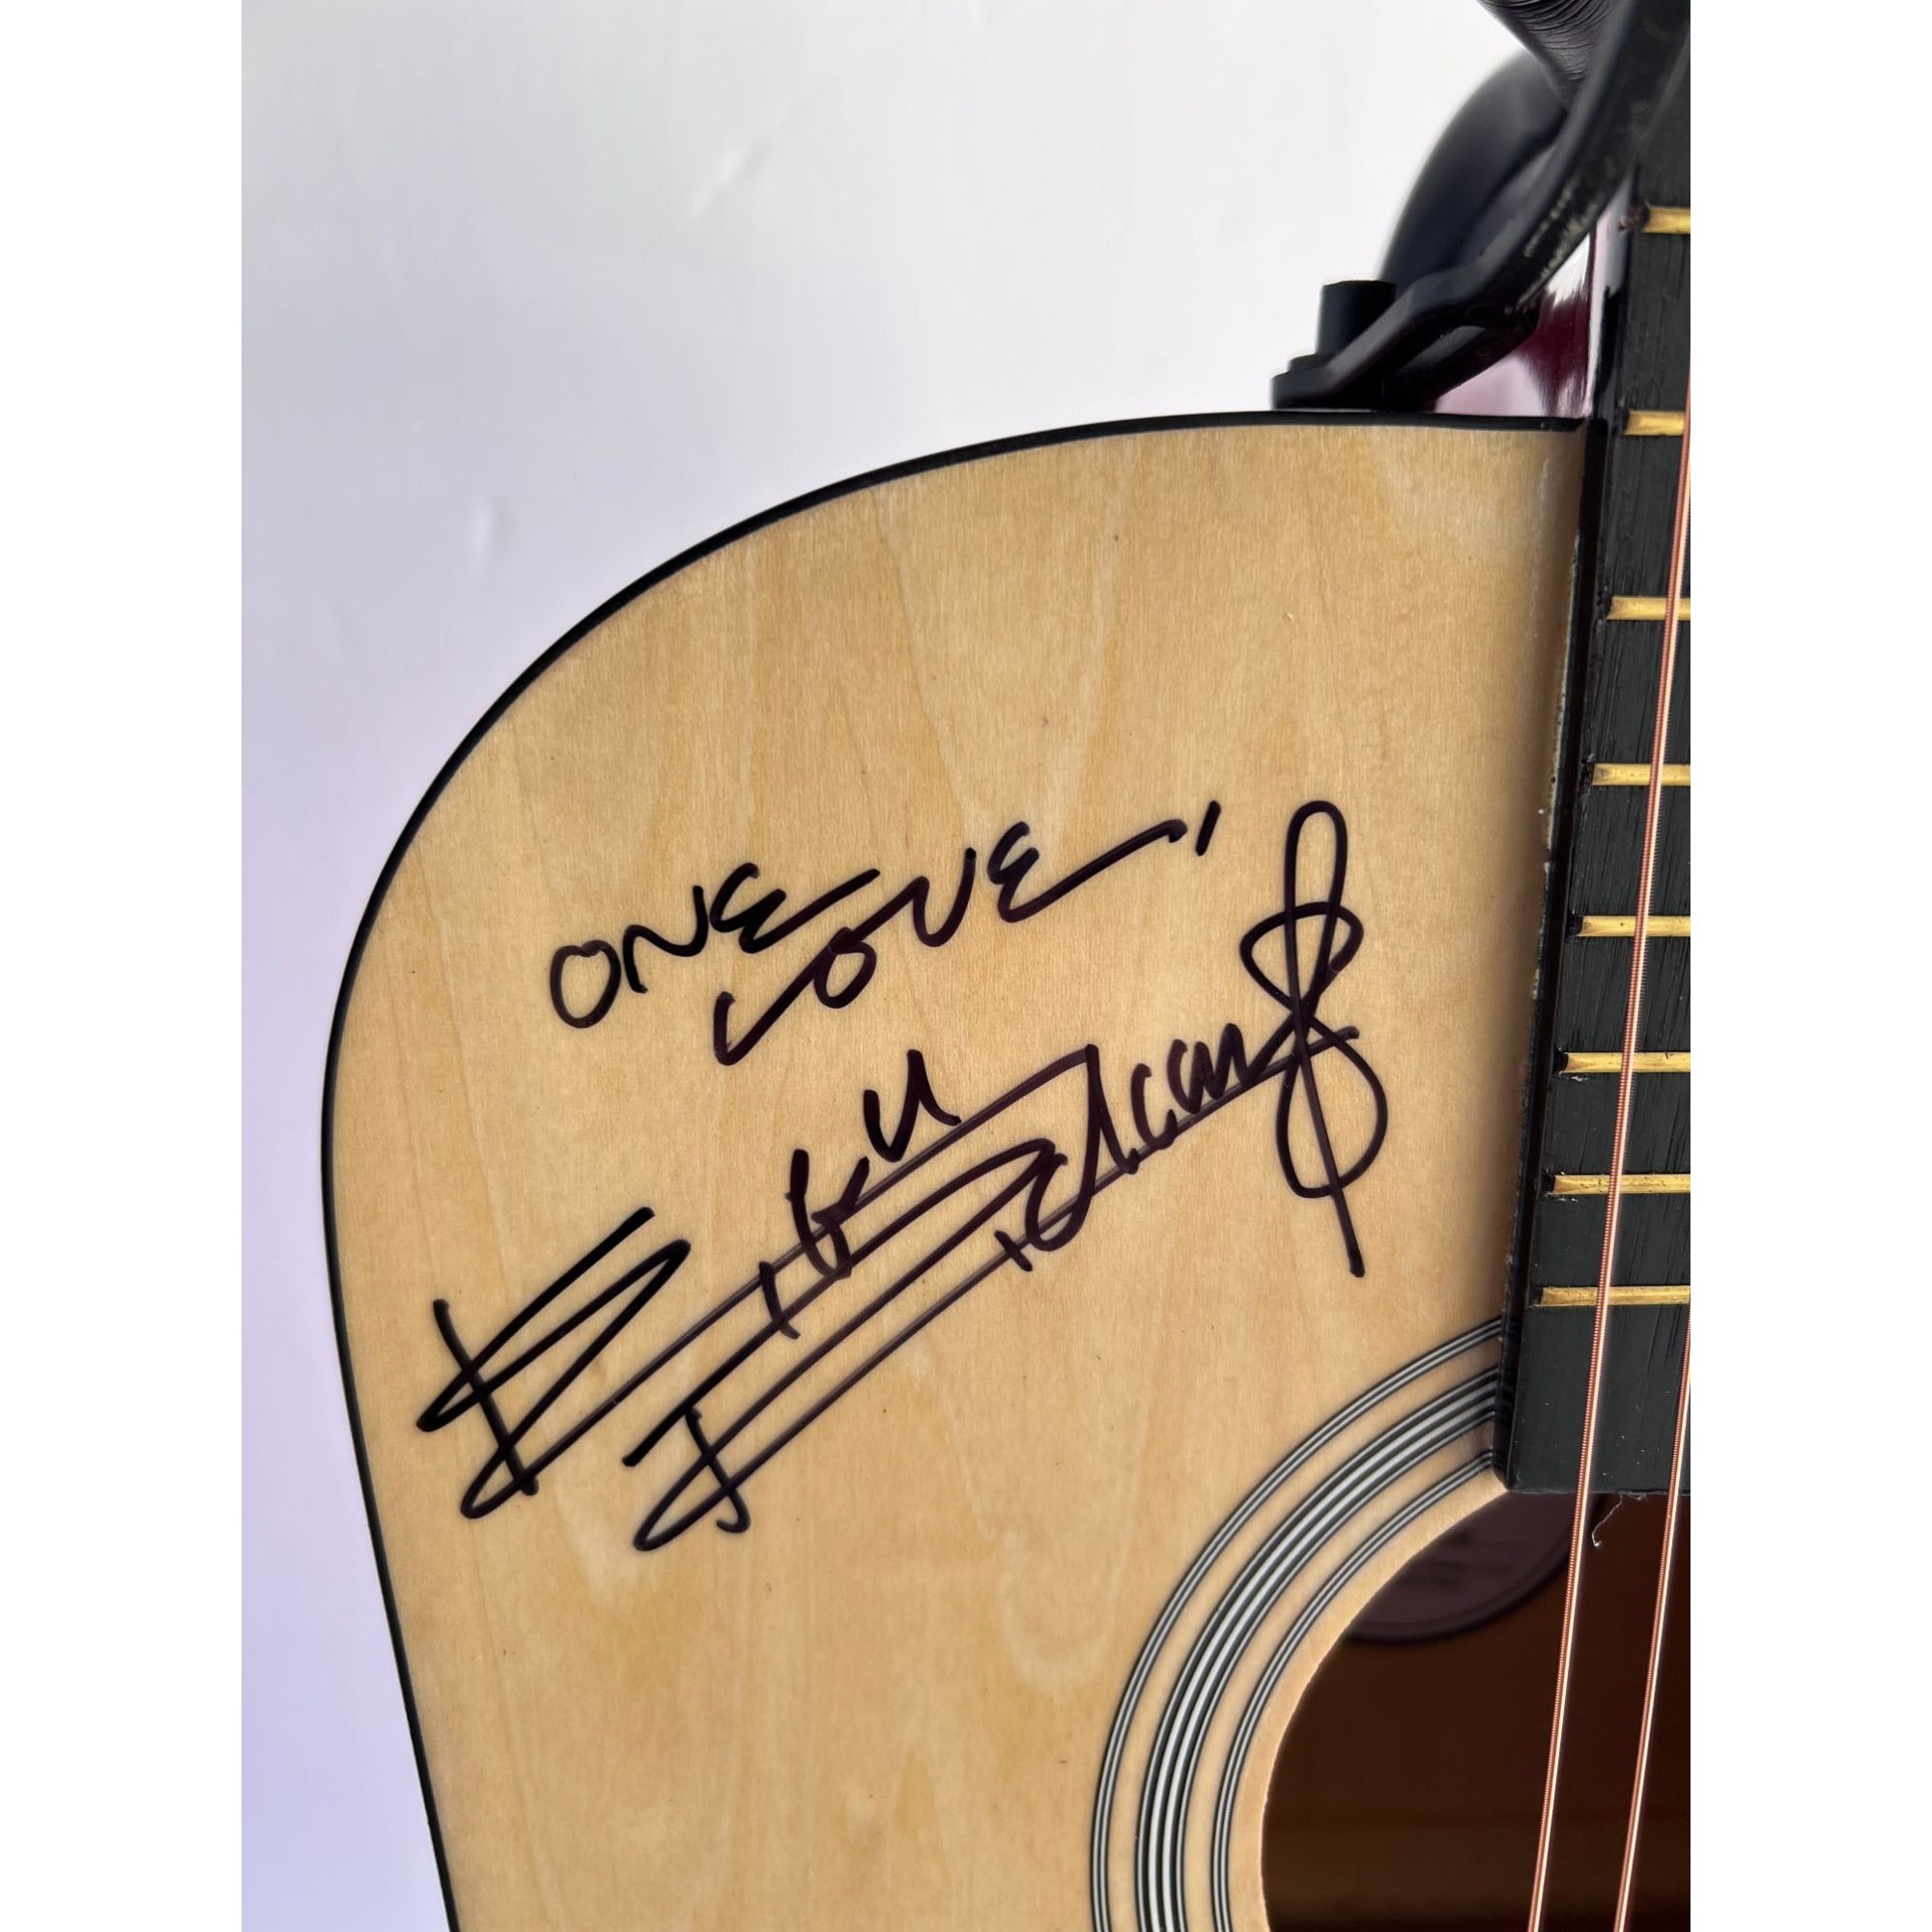 Keith Richards Bob Dylan Ronnie Wood One of a Kind signed and inscribed full size Ashharpe acoustic guitar signed with proof